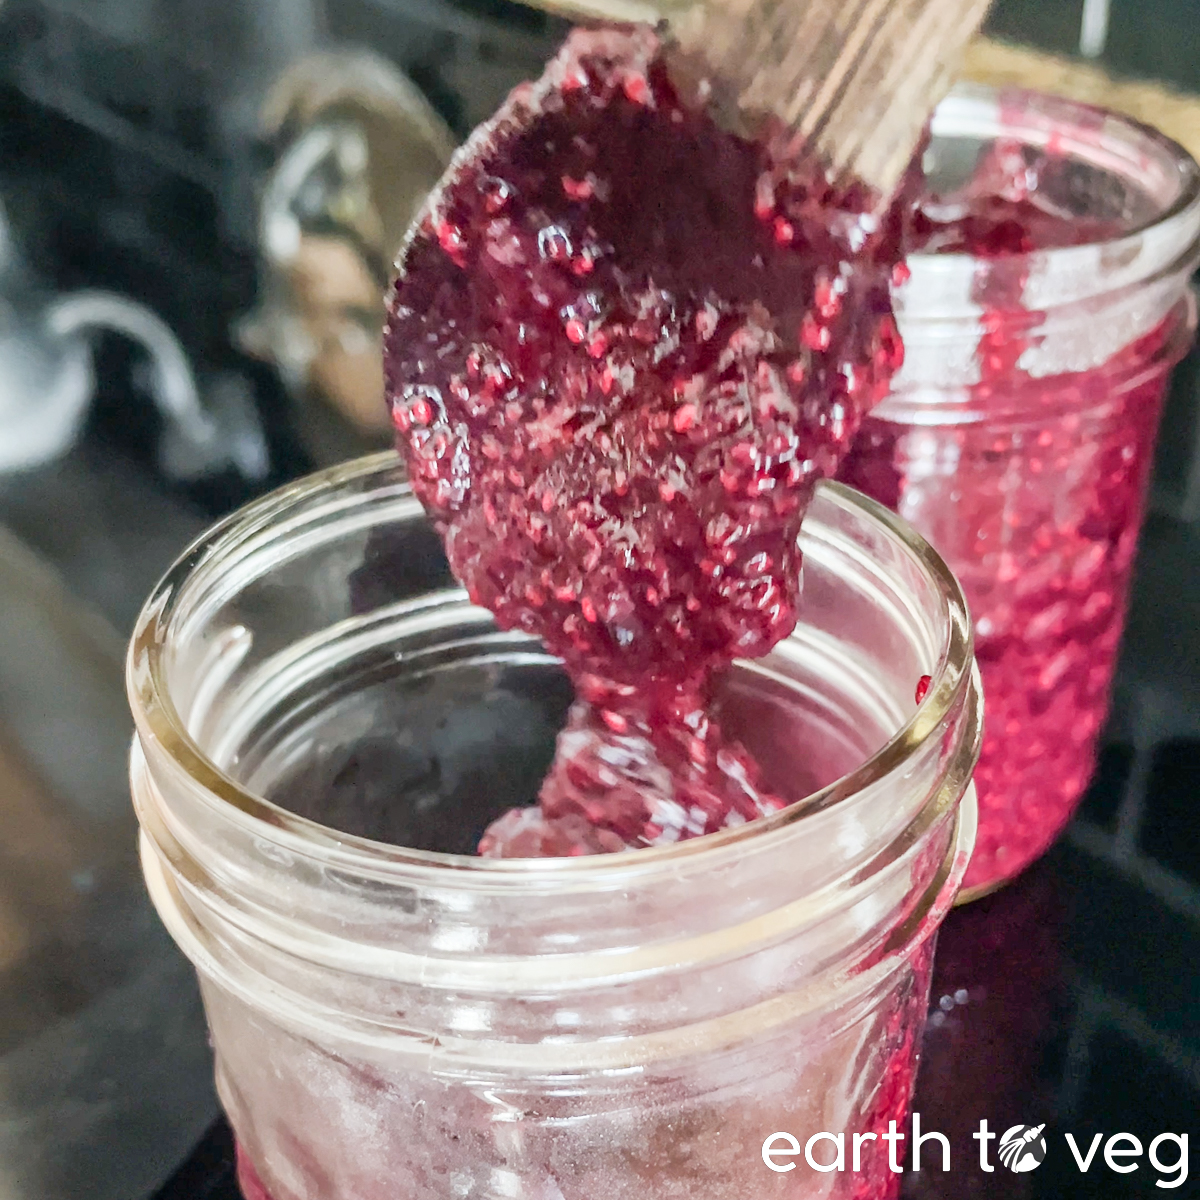 Blueberry chia jam is spooned into small glass jars.